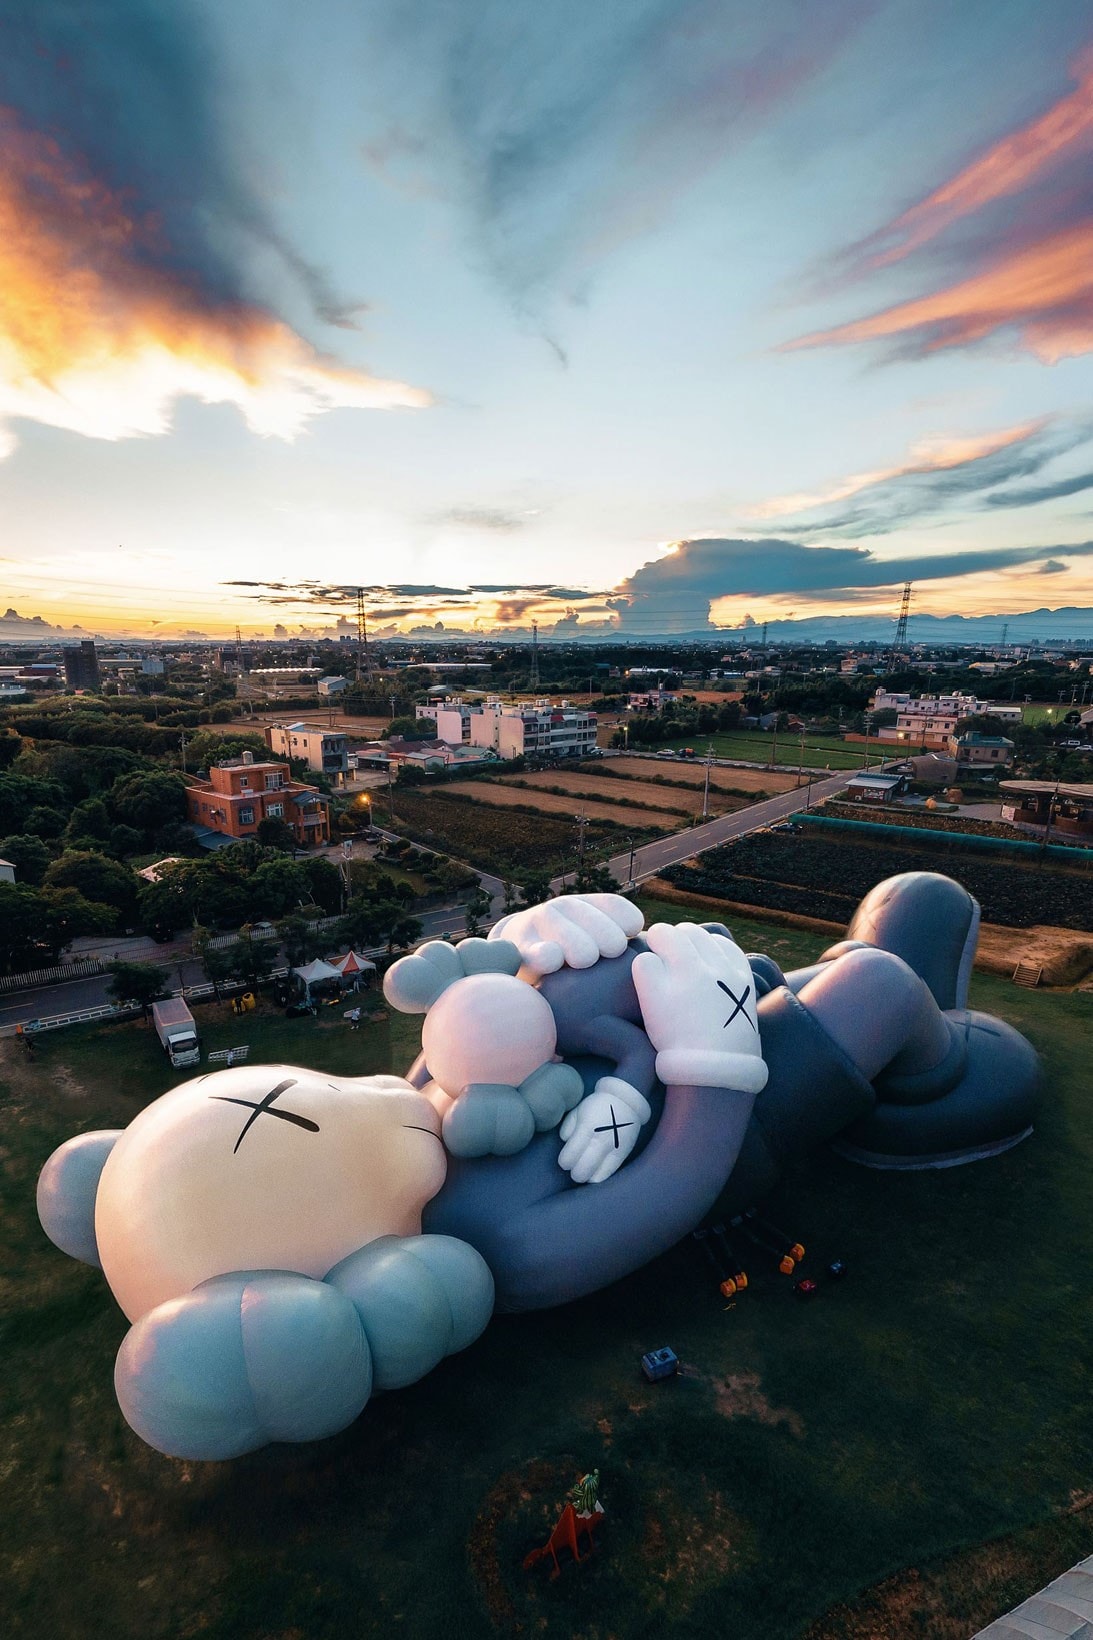 kaws holiday singapore companion installation sculpture collectible collection location release